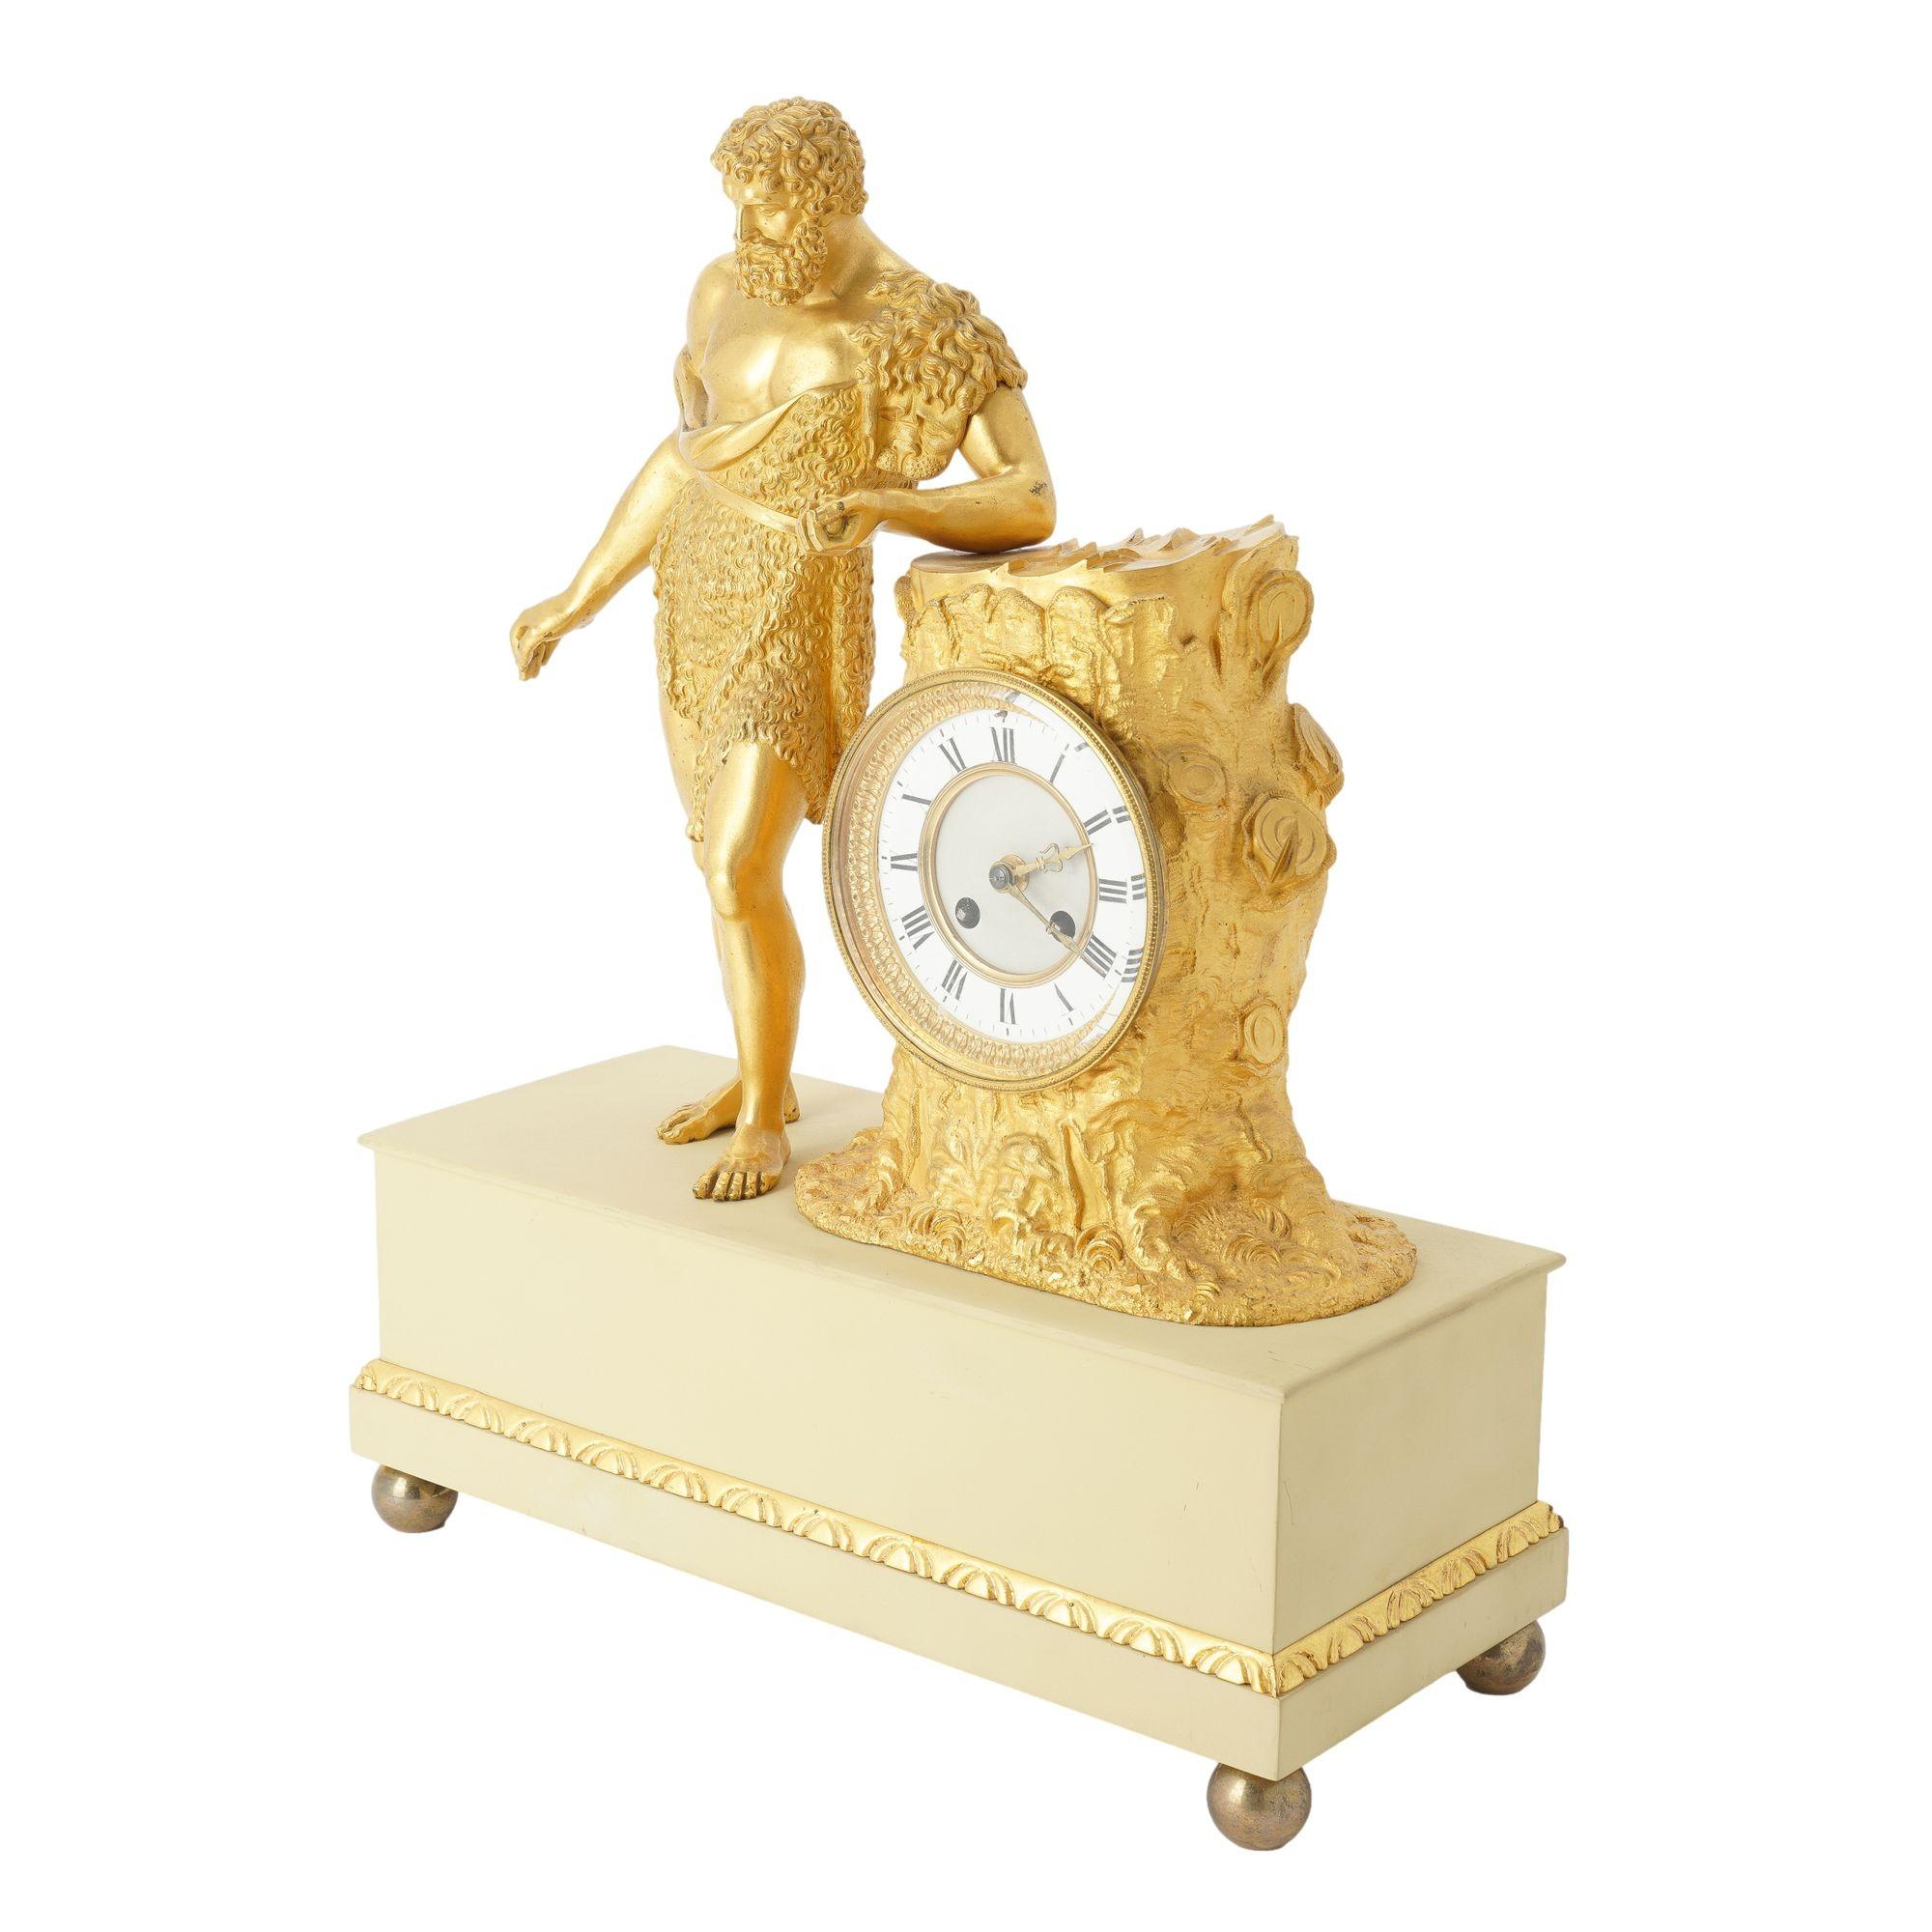 Early 19th Century French Charles X period fire gilt bronze mantel clock, c. 1820-30 For Sale